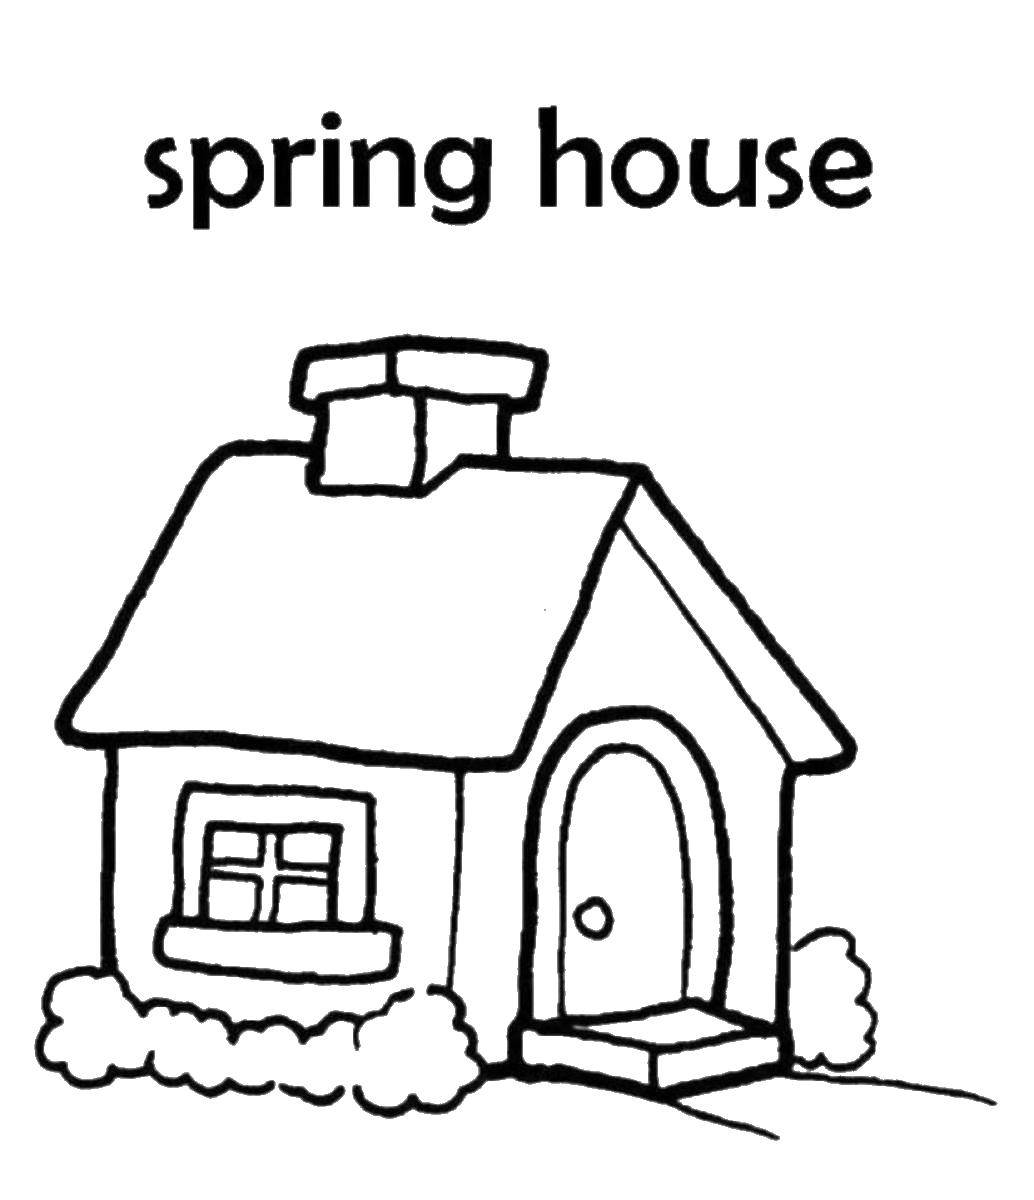 Coloring Spring house. Category Coloring house. Tags:  House, building.